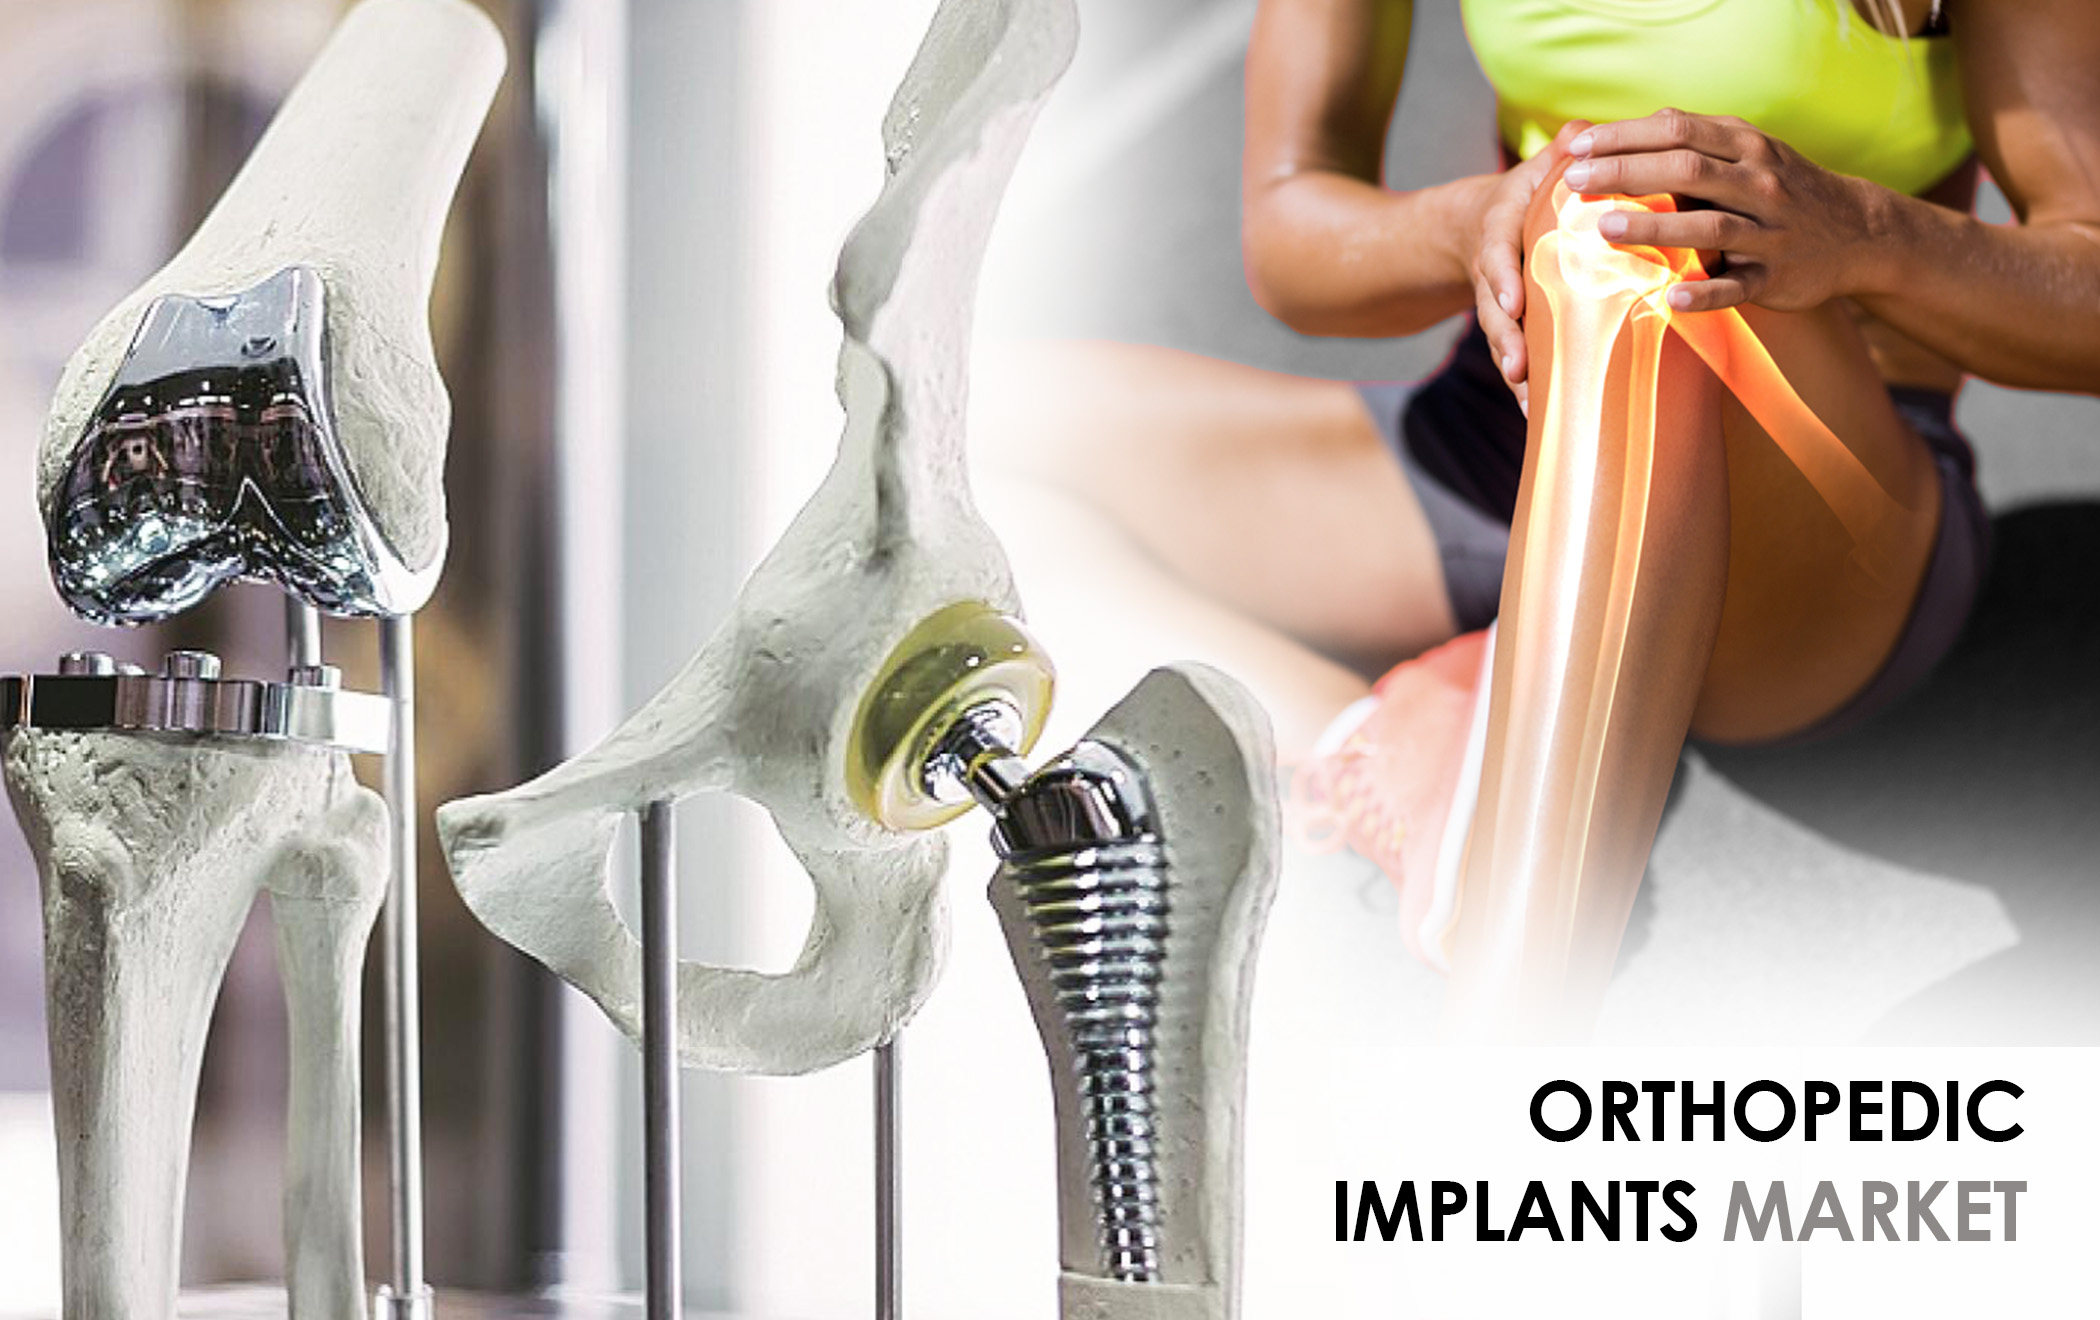 Global Orthopedic Implants Market is likely to witness CAGR of 4.7% from 2019 to 2030